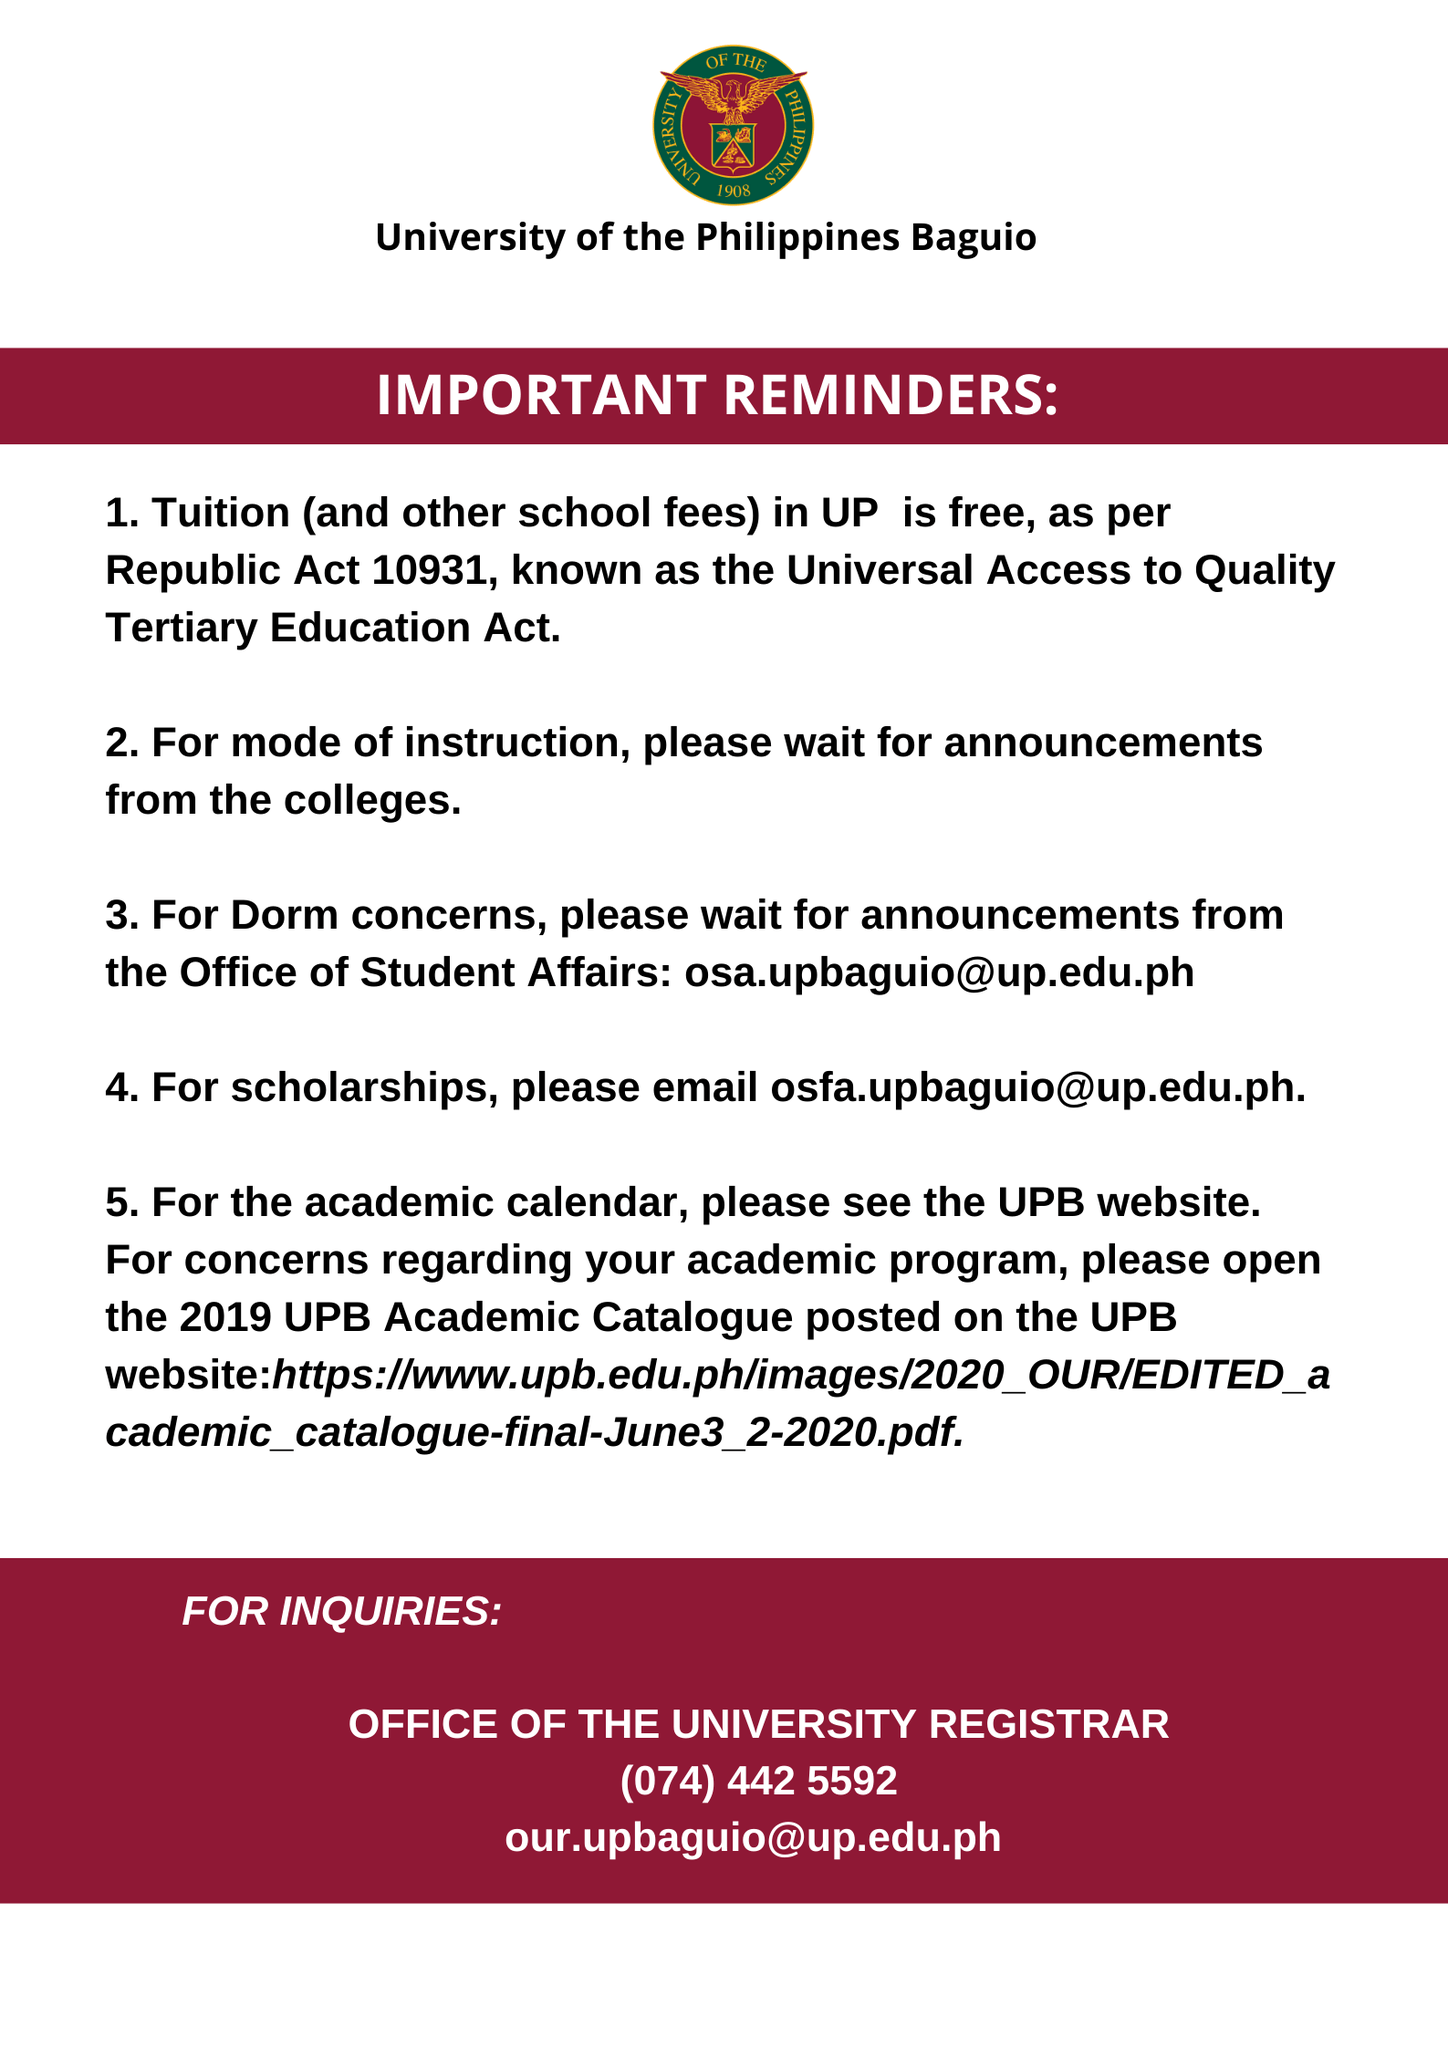 Announcement from the Office of the University Registrar UP BAGUIO